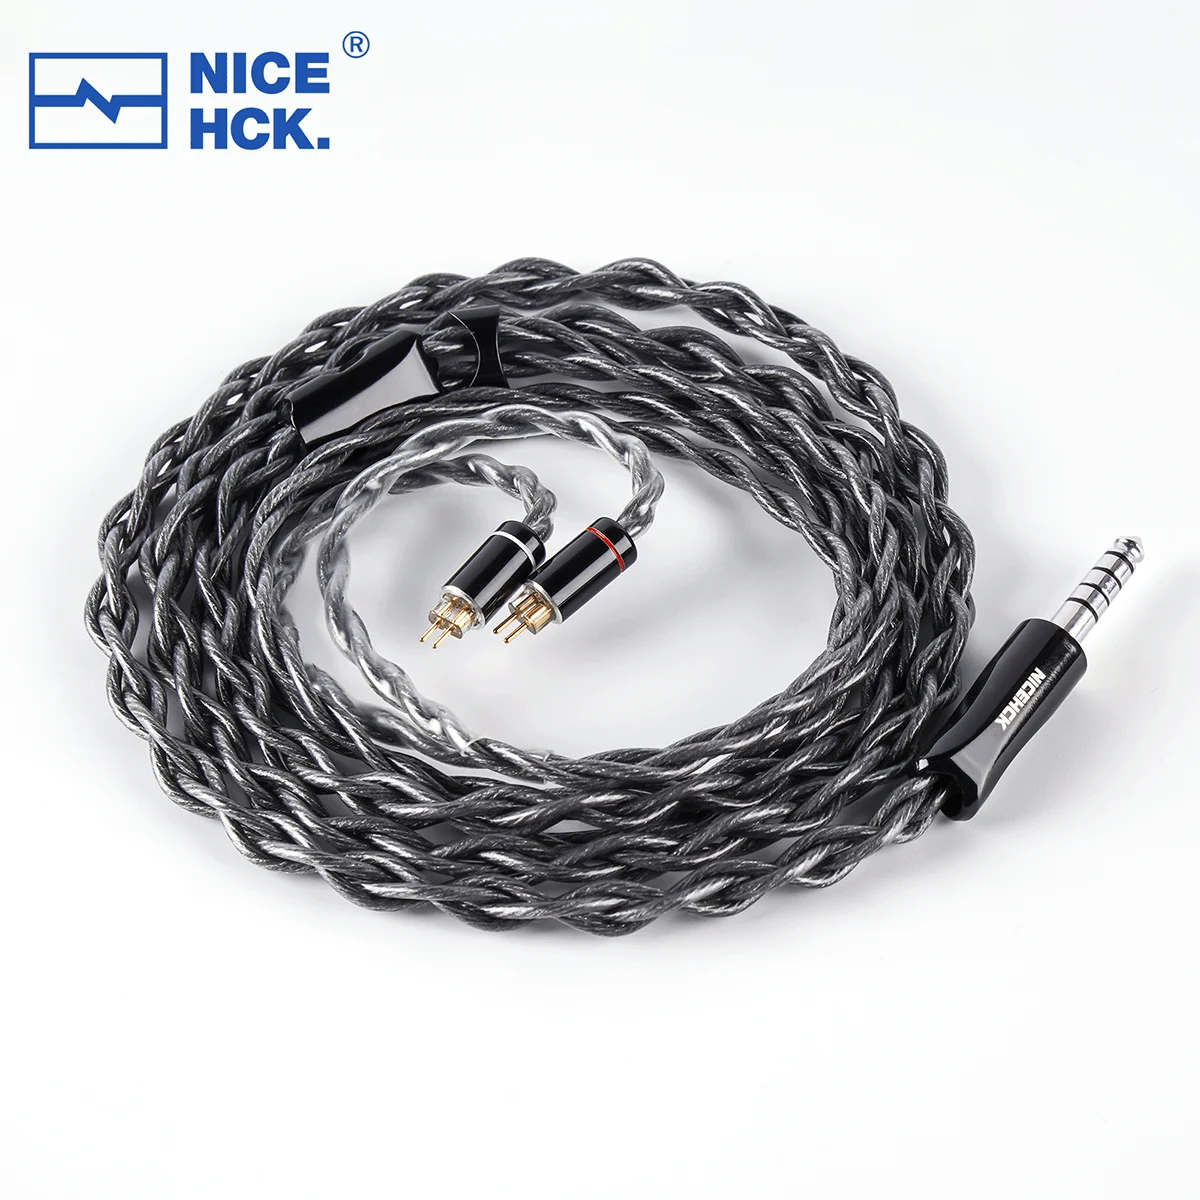 

NiceHCK PtGr Graphene Plated Alloy Copper Platinum Plated OCC Plug Upgrade Headset Wire 2Pin Earphone Cable for BA15 Himalaya